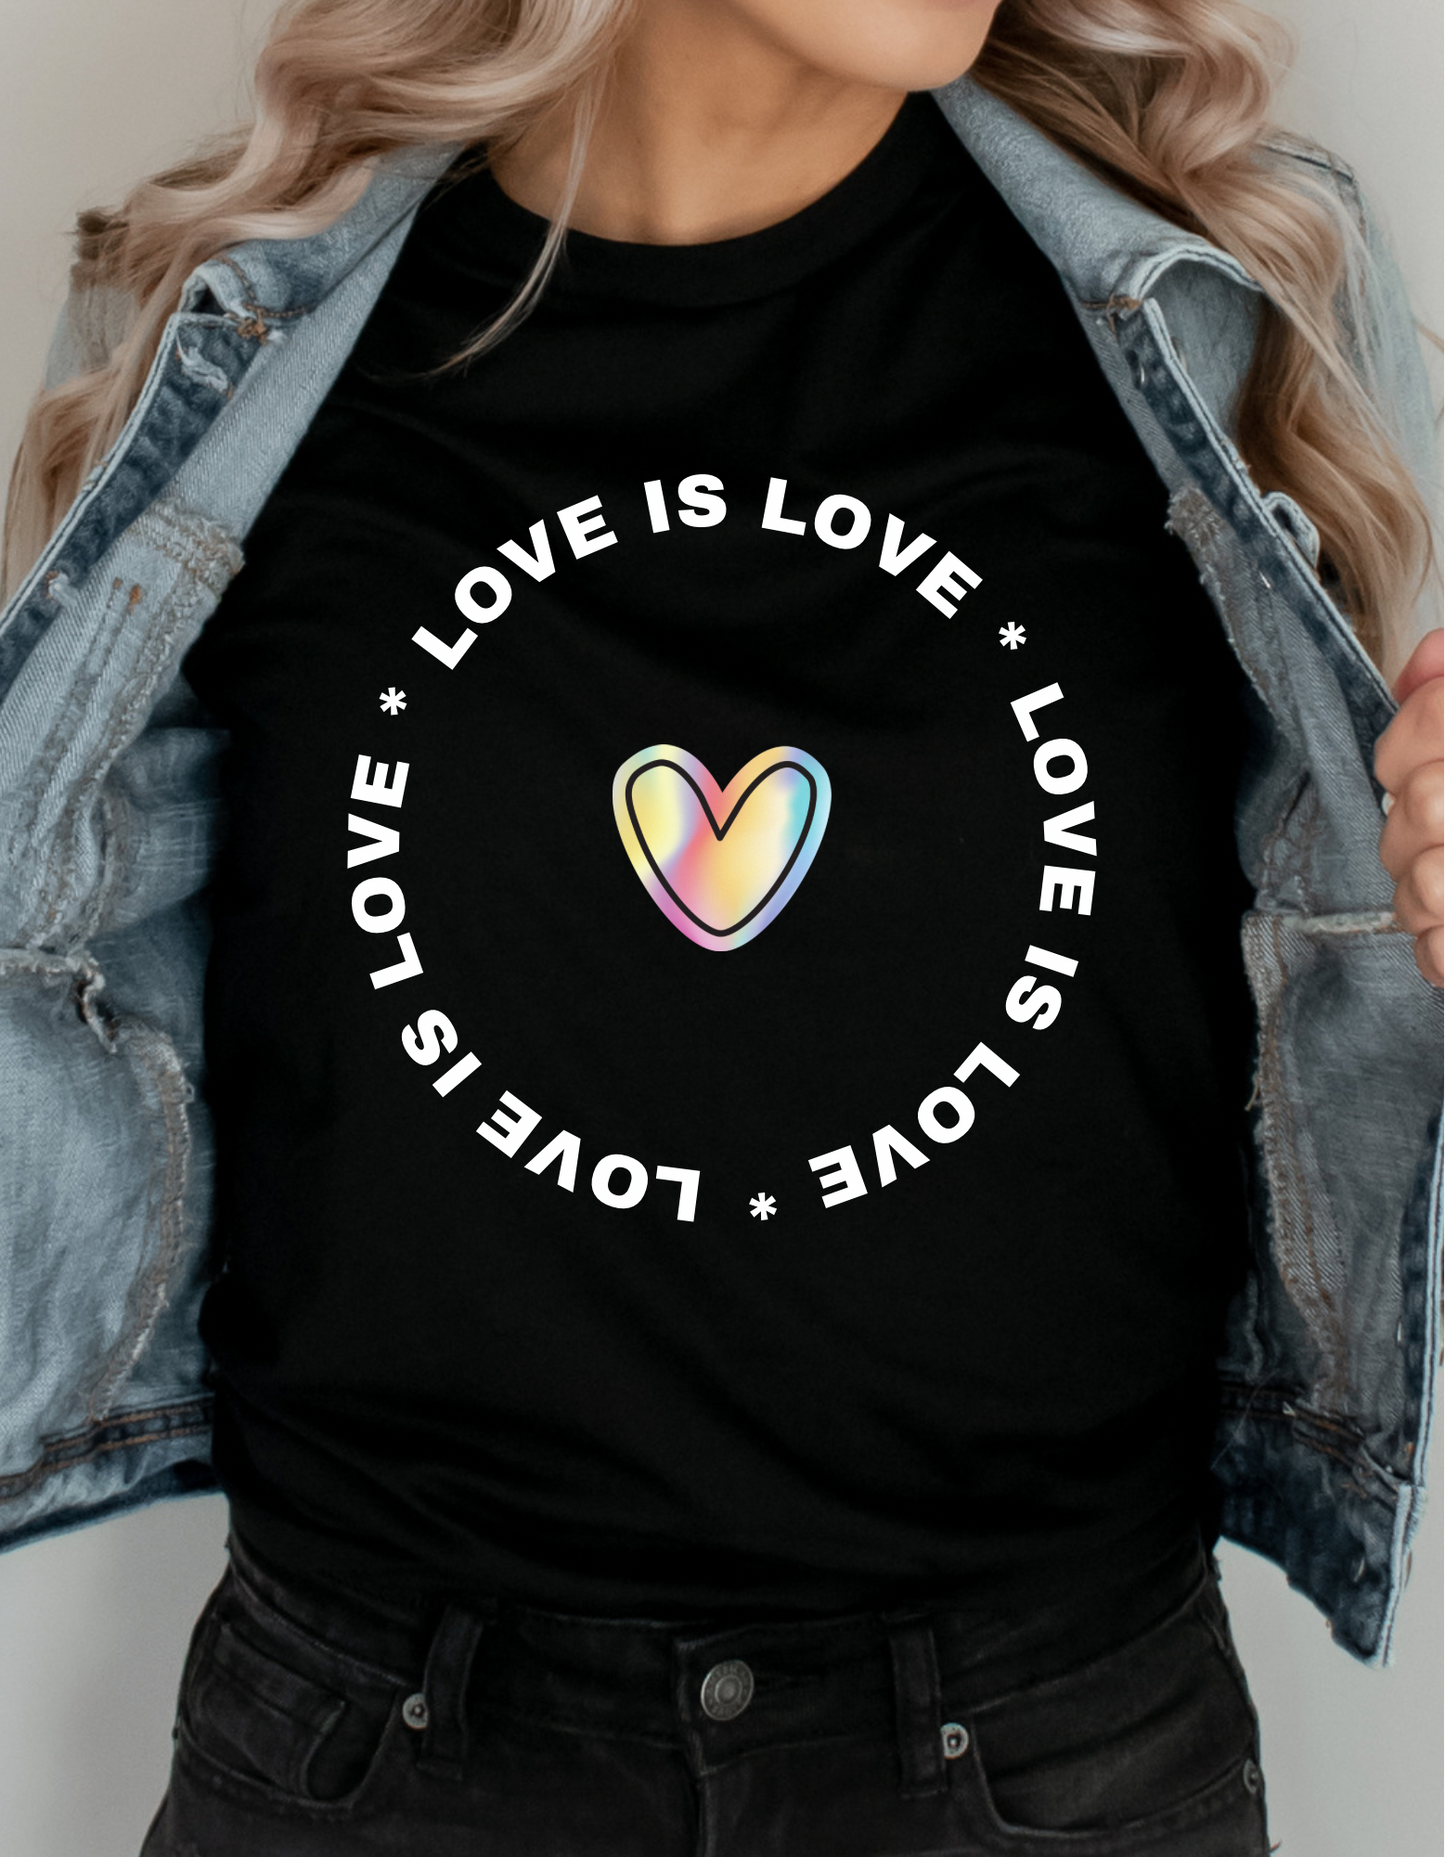 Love is love with heart